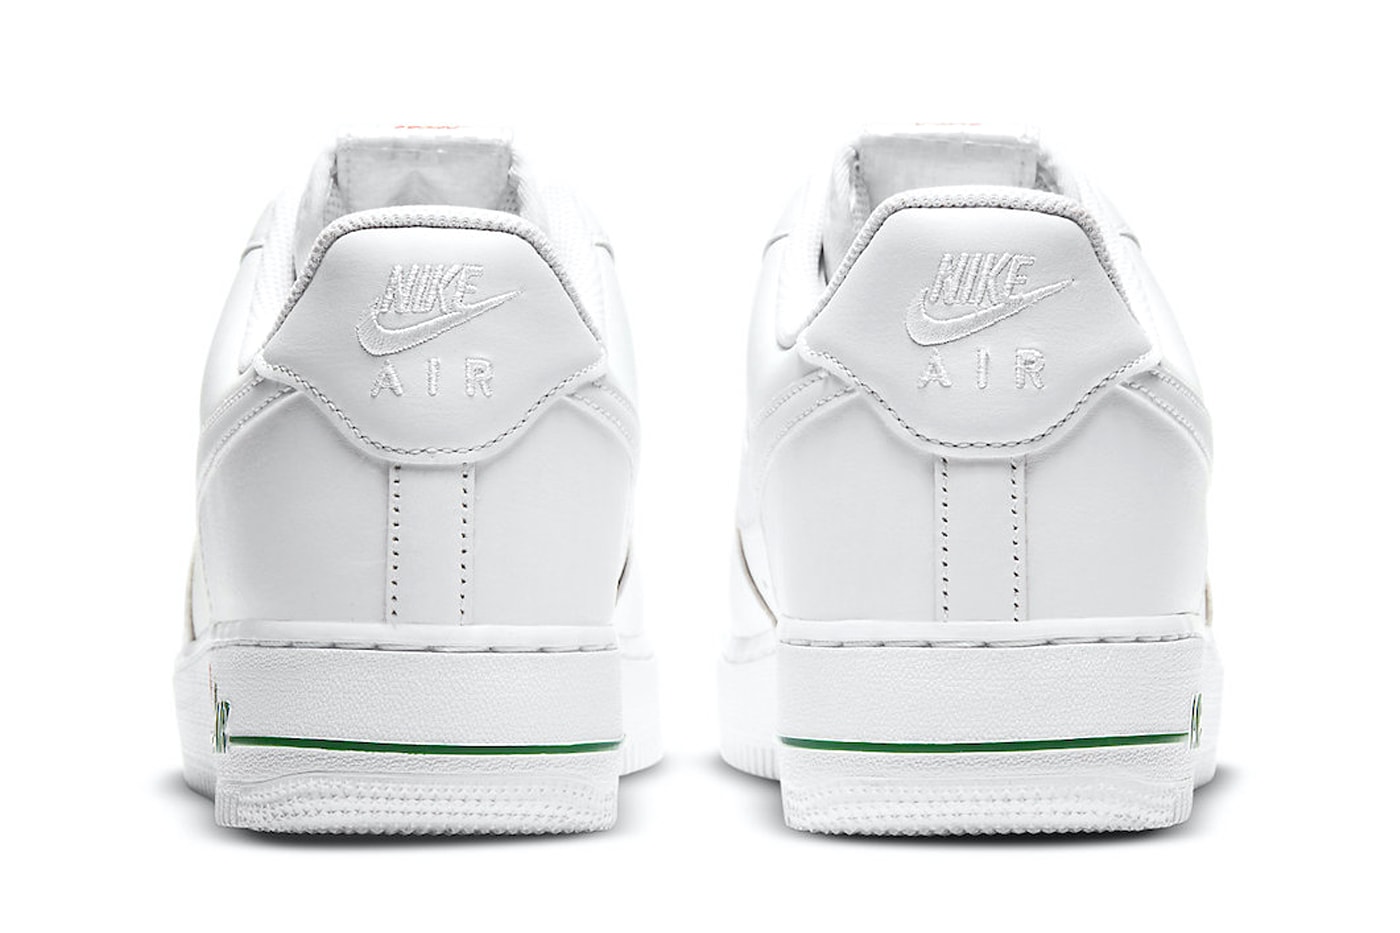 Nike Air Force 1 Low "Rose" Restocks For a Holiday 2023 Release CU6312-100 White/University Red-Pine Green